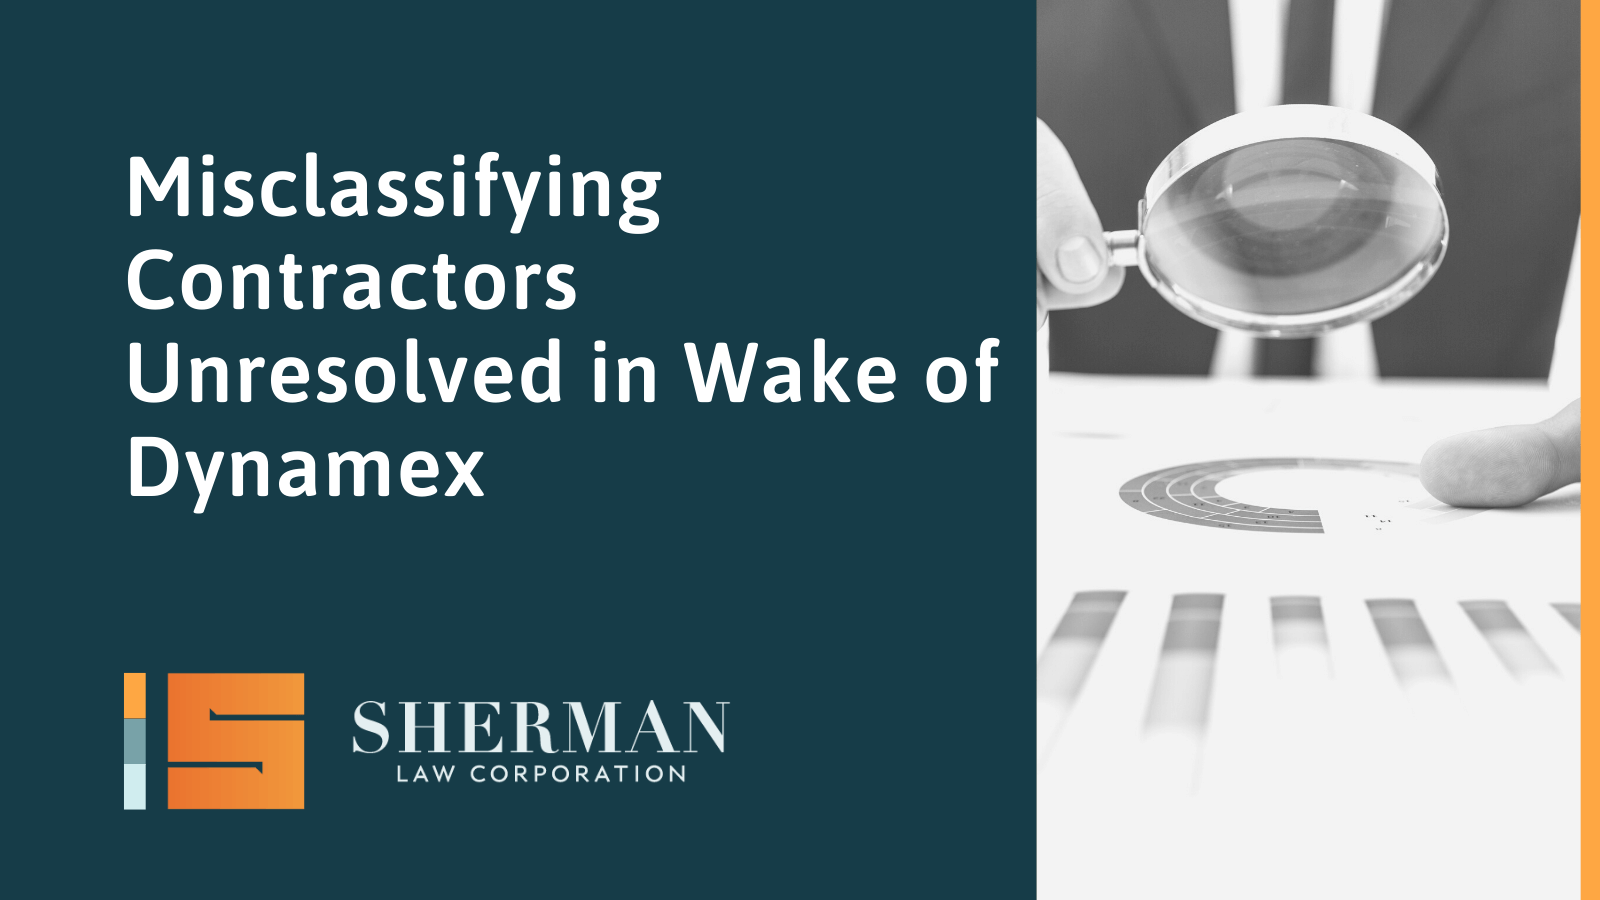 Misclassifying Contractors Unresolved in Wake of Dynamex - california employment lawyer - sherman law corporation